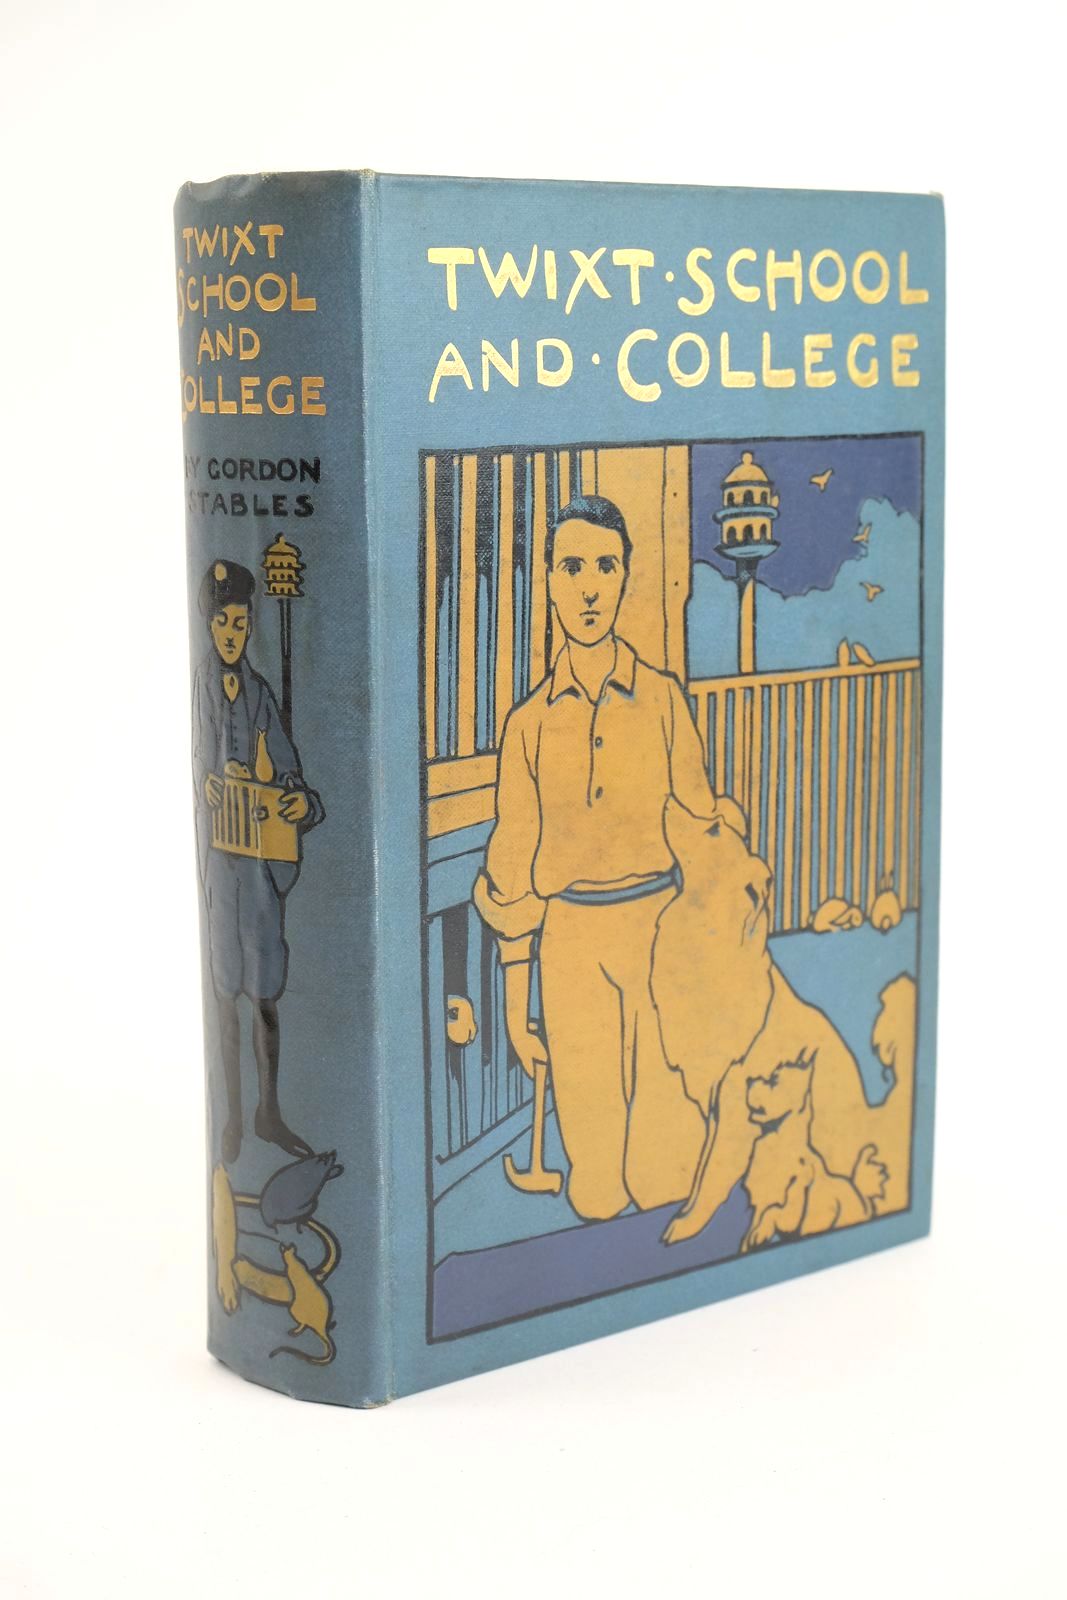 Photo of TWIXT SCHOOL AND COLLEGE written by Stables, Gordon illustrated by Jackson, A.E. Parkinson, W. published by Blackie And Son Limited (STOCK CODE: 1323812)  for sale by Stella & Rose's Books